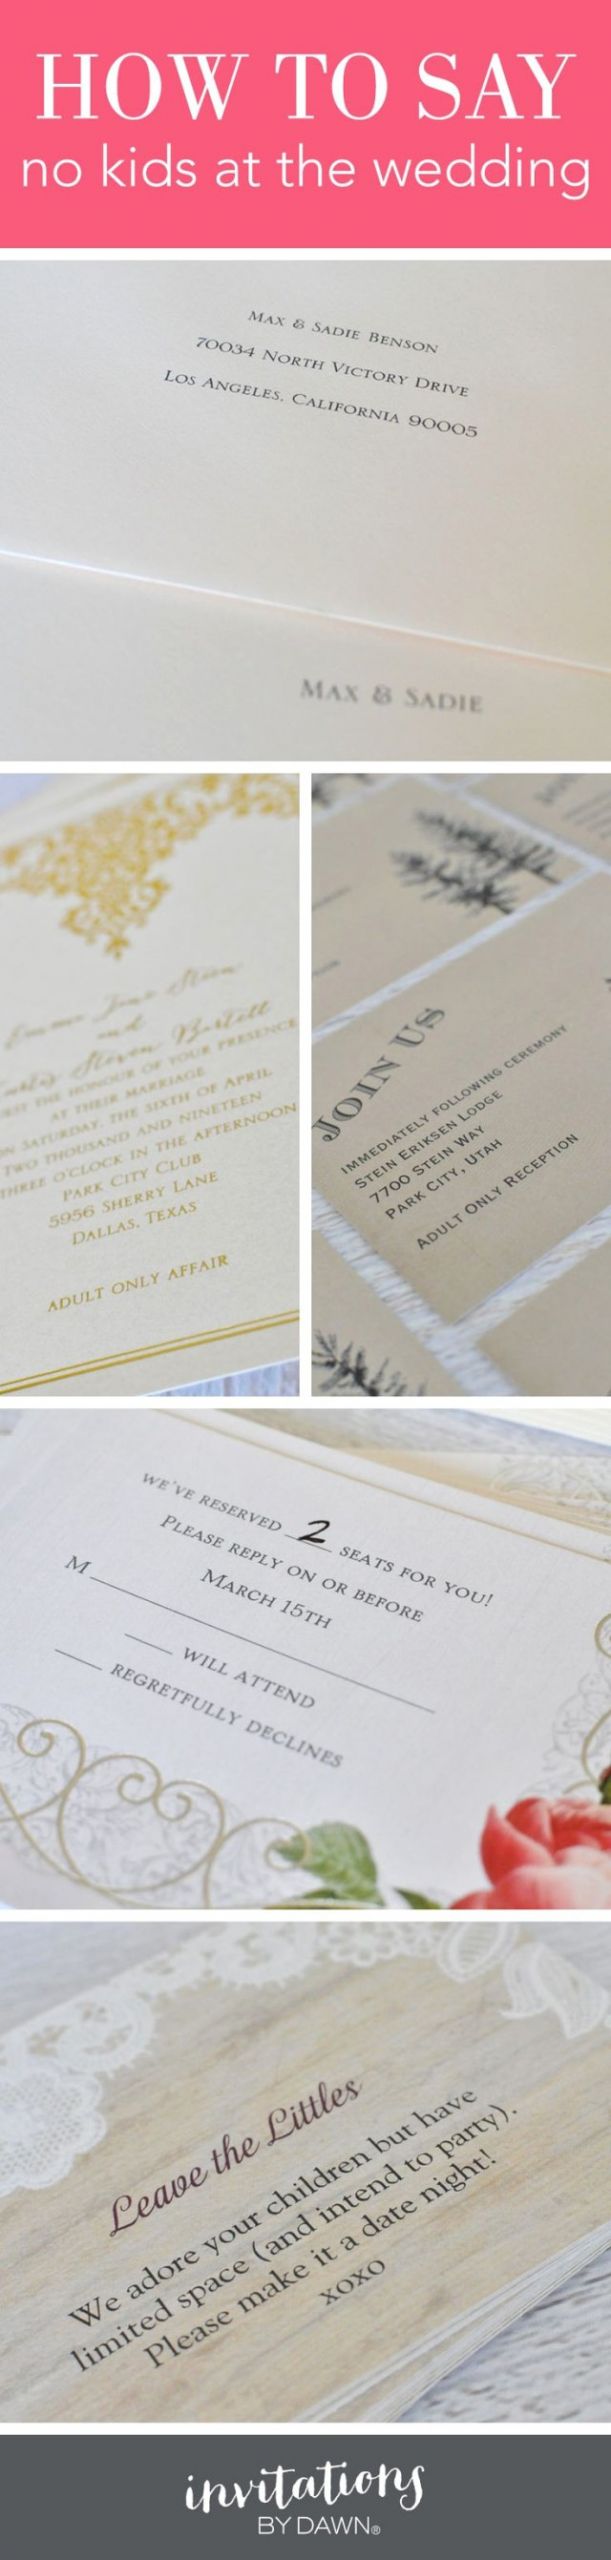 Hipster Wedding Invitations
 24 Excellent of Hipster Wedding Invitations